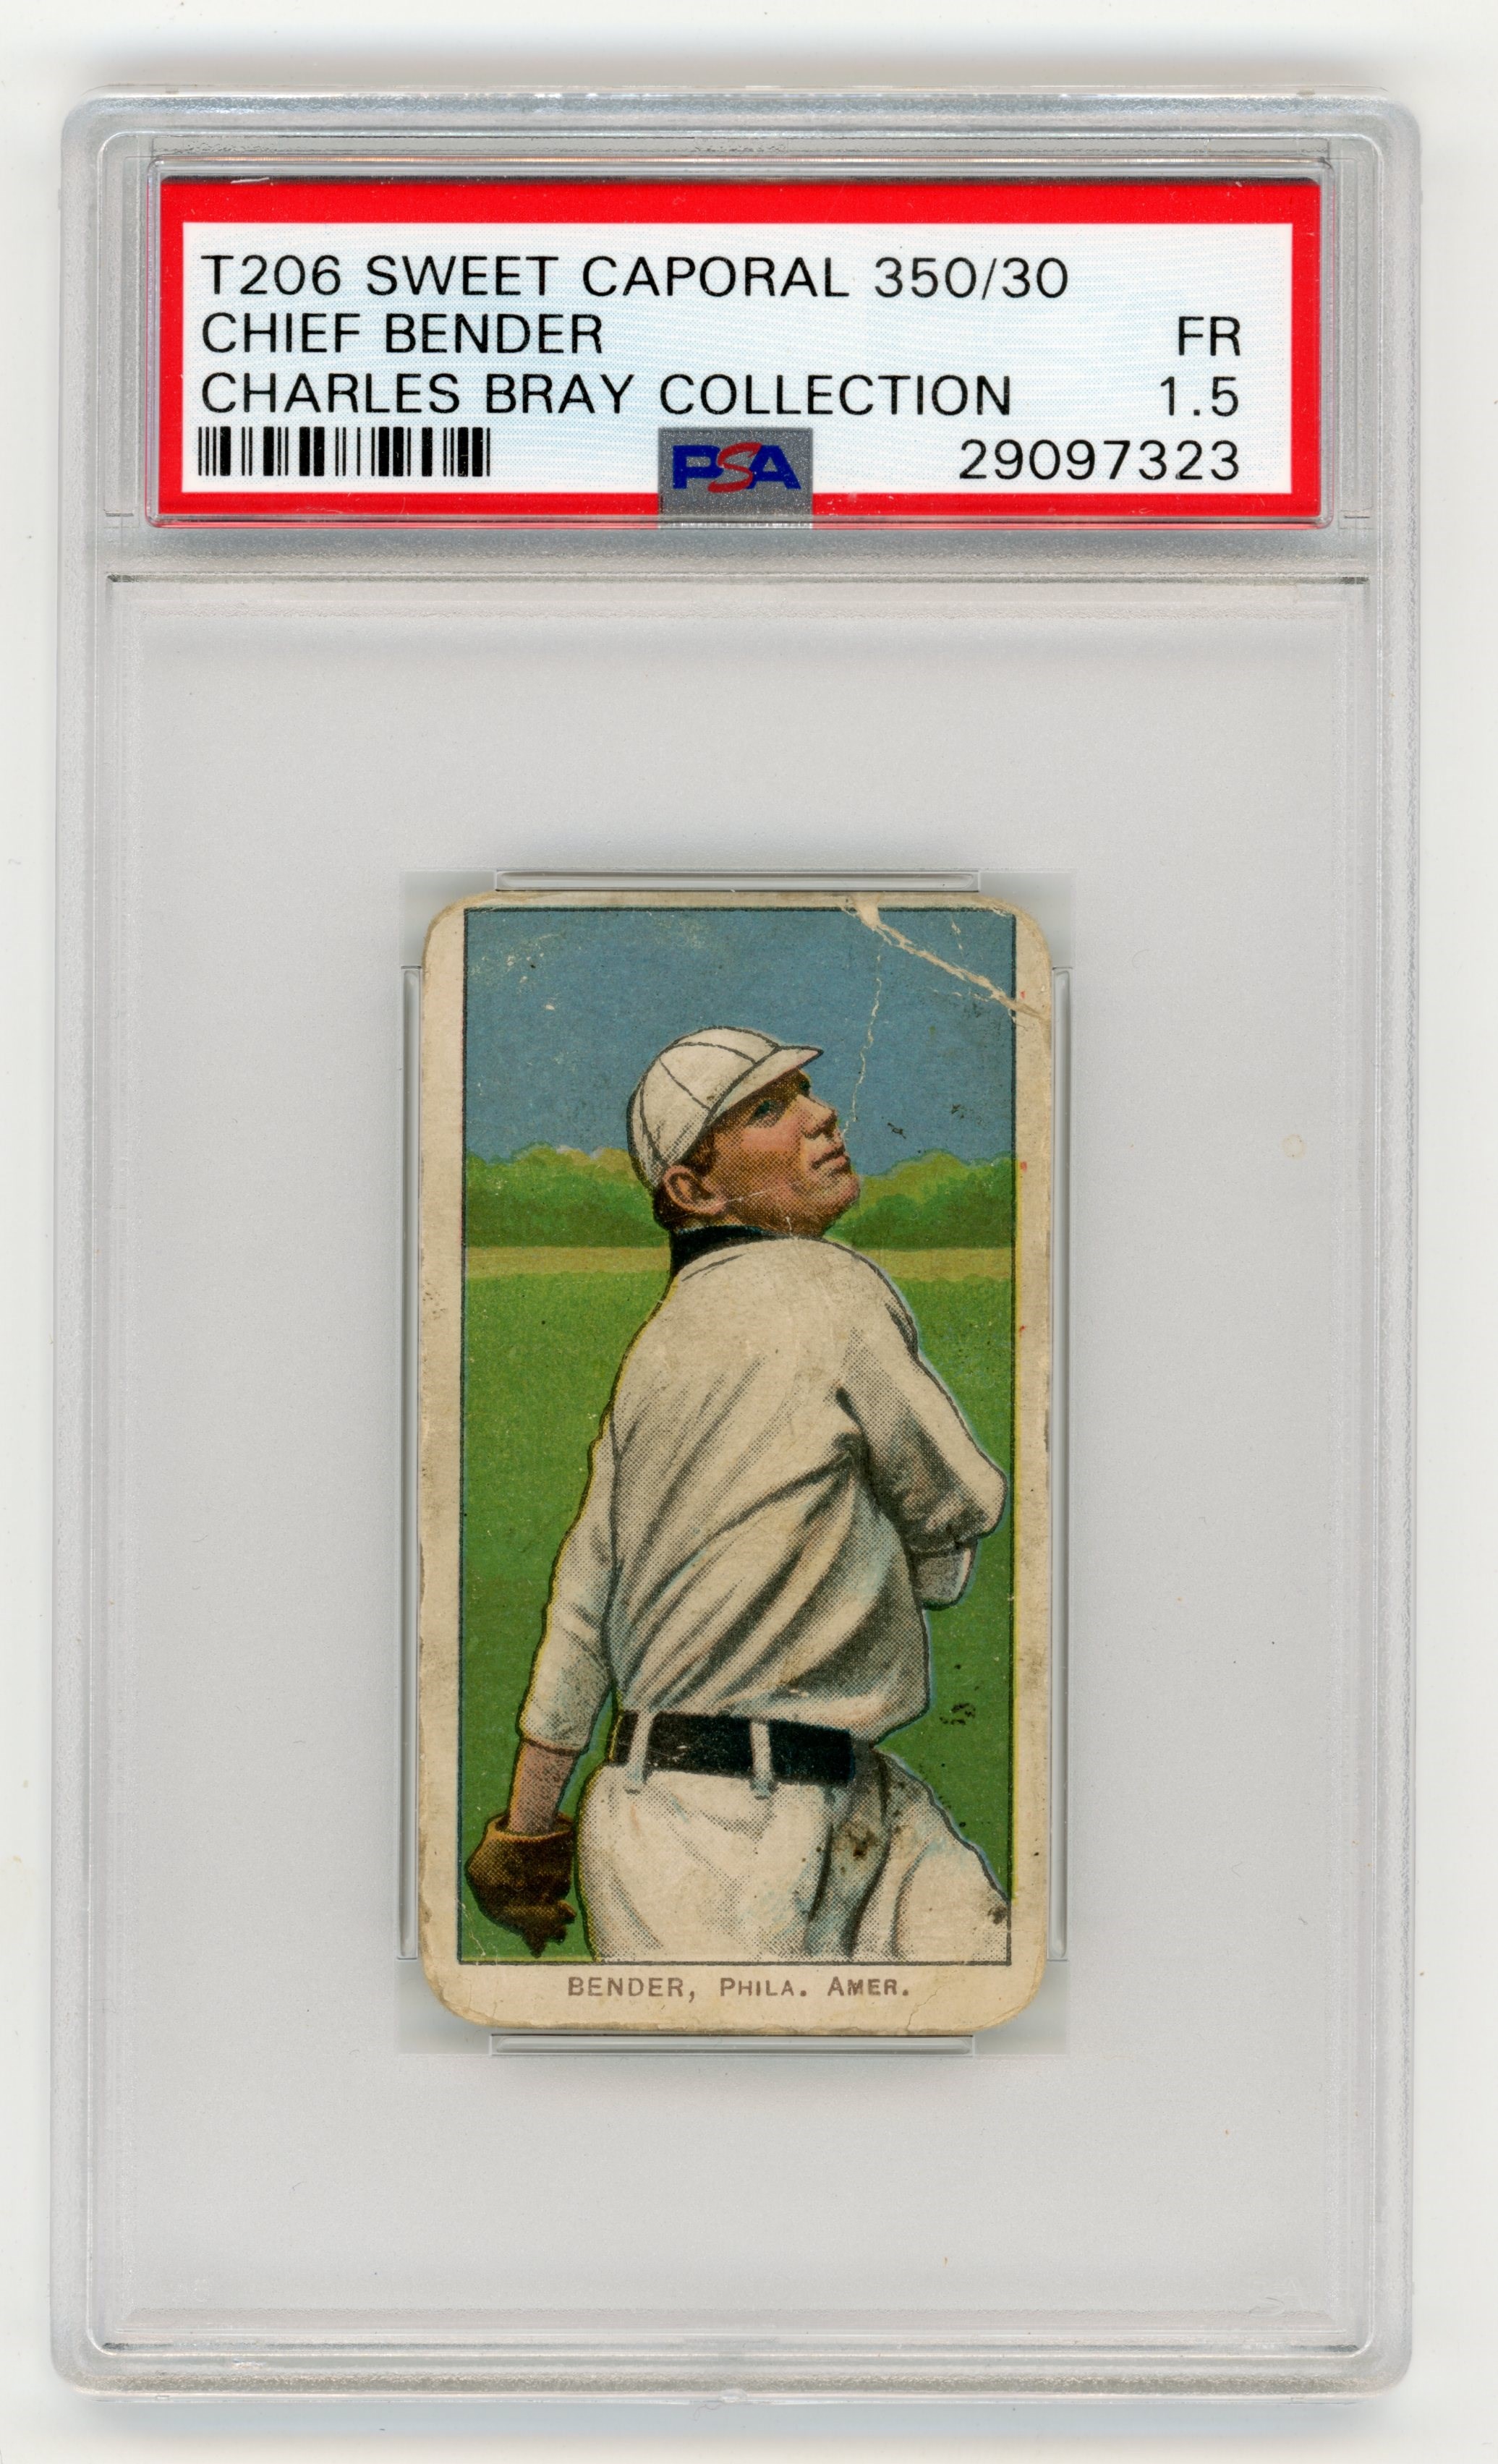 - T206 Sweet Caporal 350/30 Chief Bender PSA 1.5 From Charles Bray Collection